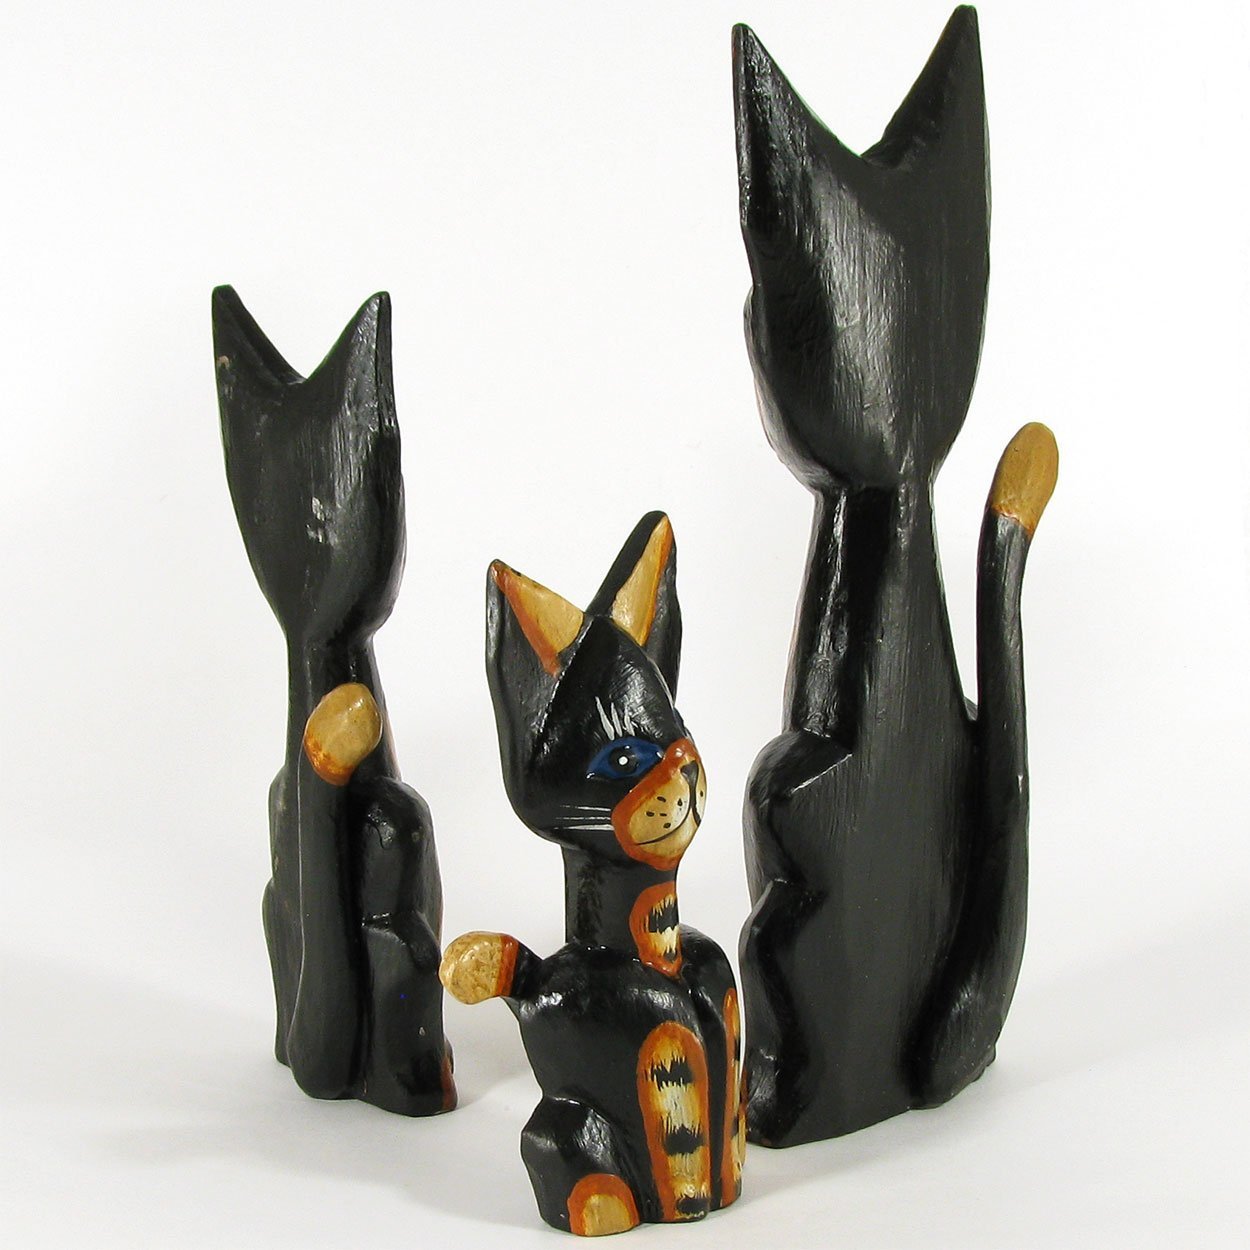 140044 - Set of Three 6-10in Cats Painted Rustic Wood Folk Art Carvings - Black and Gold